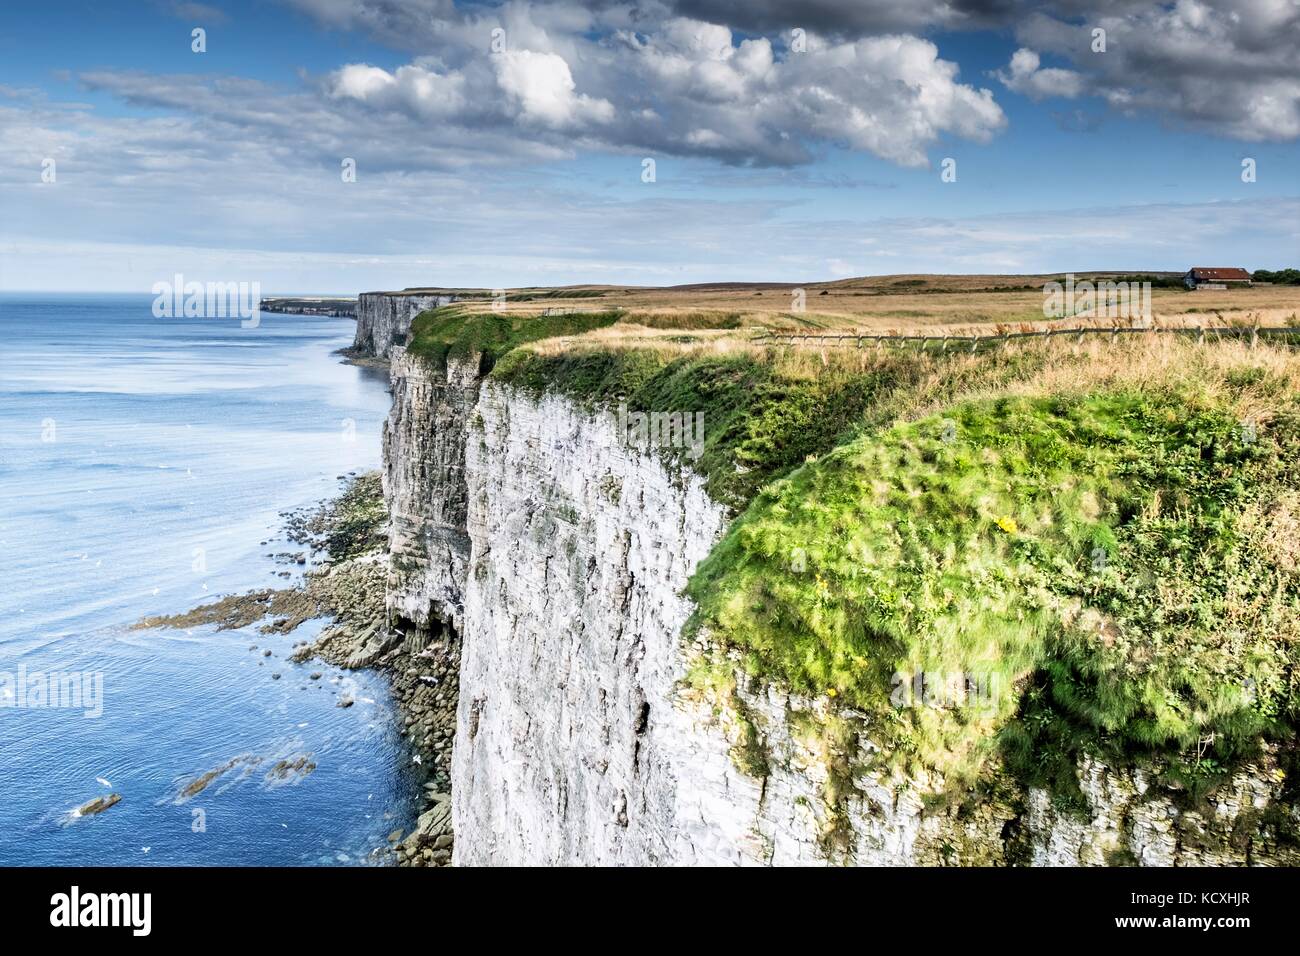 Flamborough Cliffs between Filey and Bridlington North Yorkshire. These chalk stone cliffs look stunning with the crystal clear waters lapping them. Stock Photo